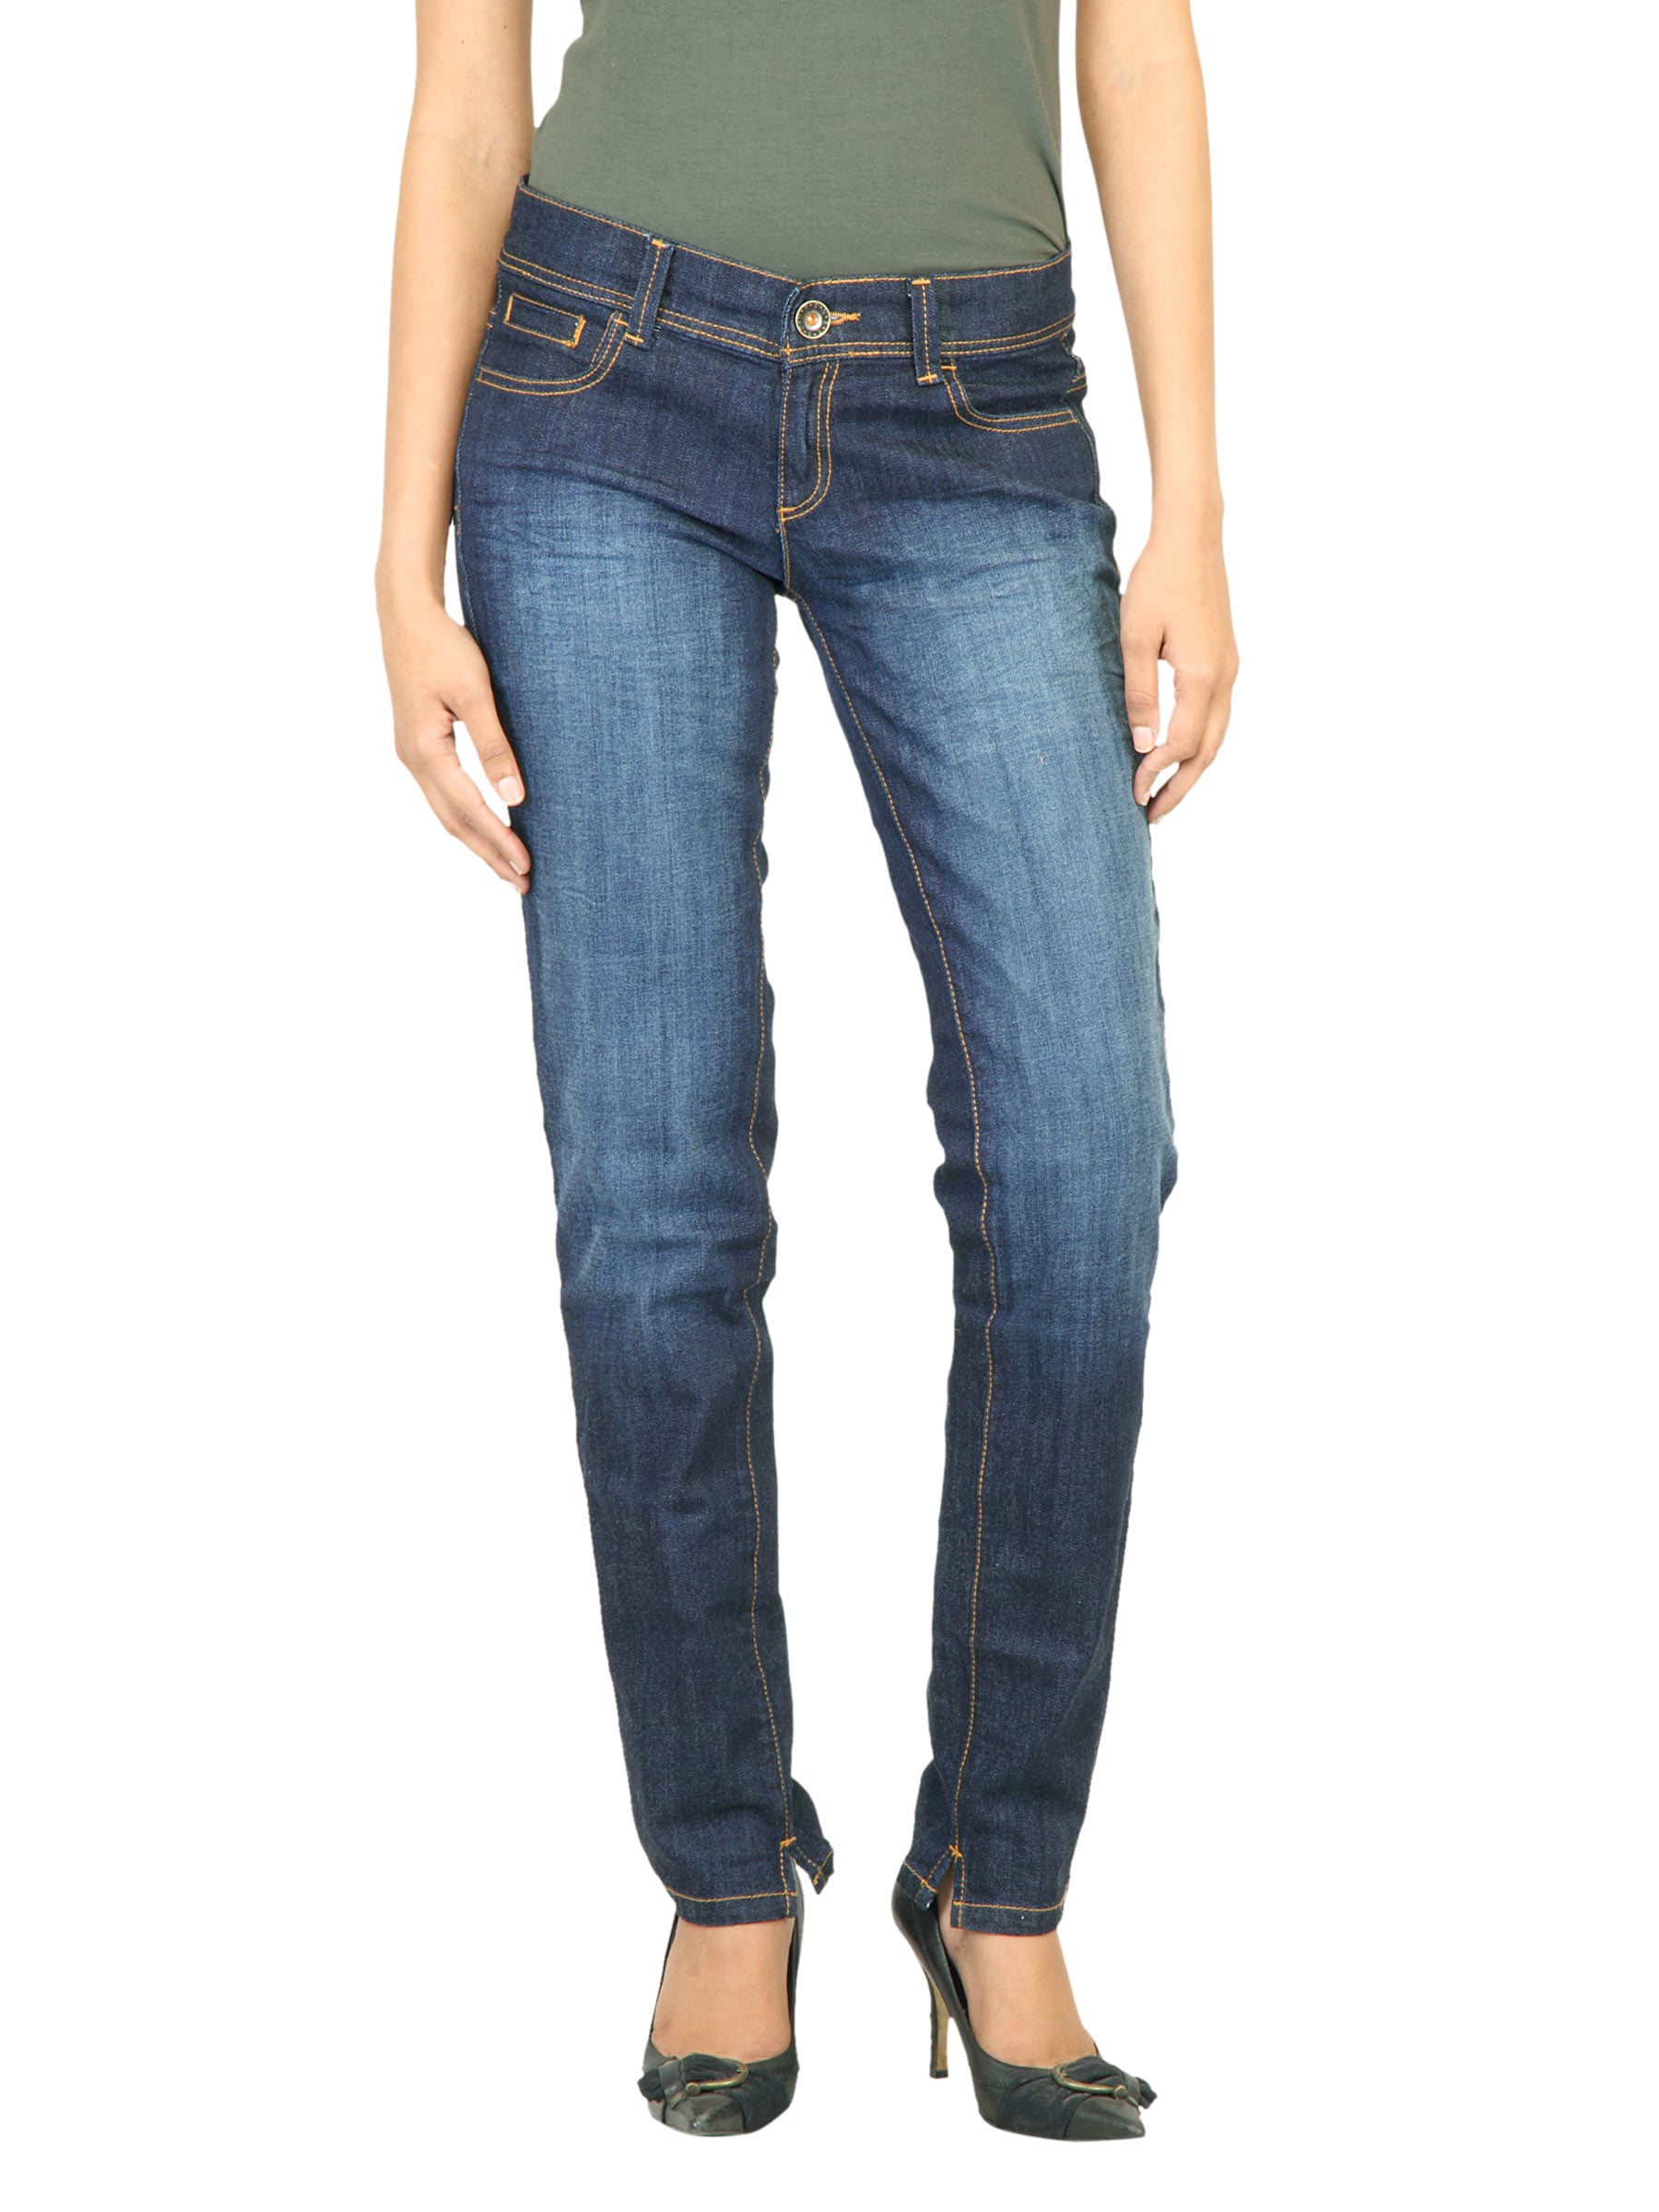 United Colors of Benetton Women Washed Blue Jeans